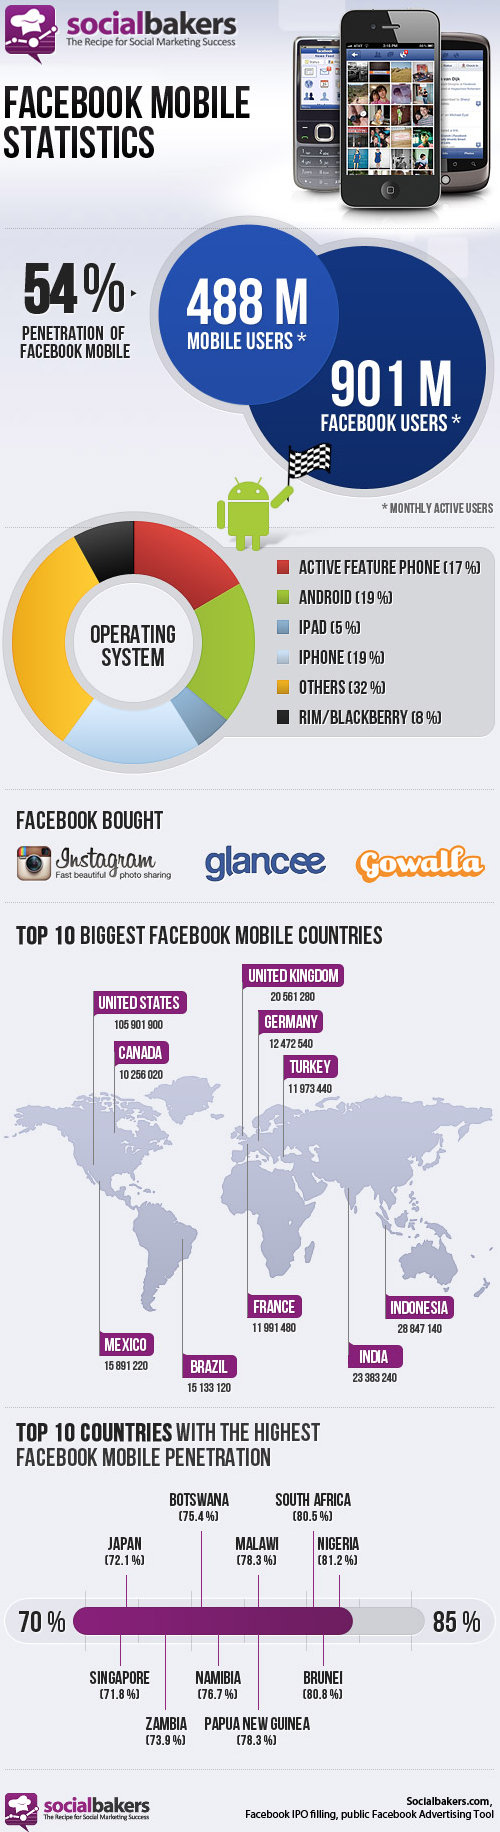 Facebook Hits 488 Million Mobile Users